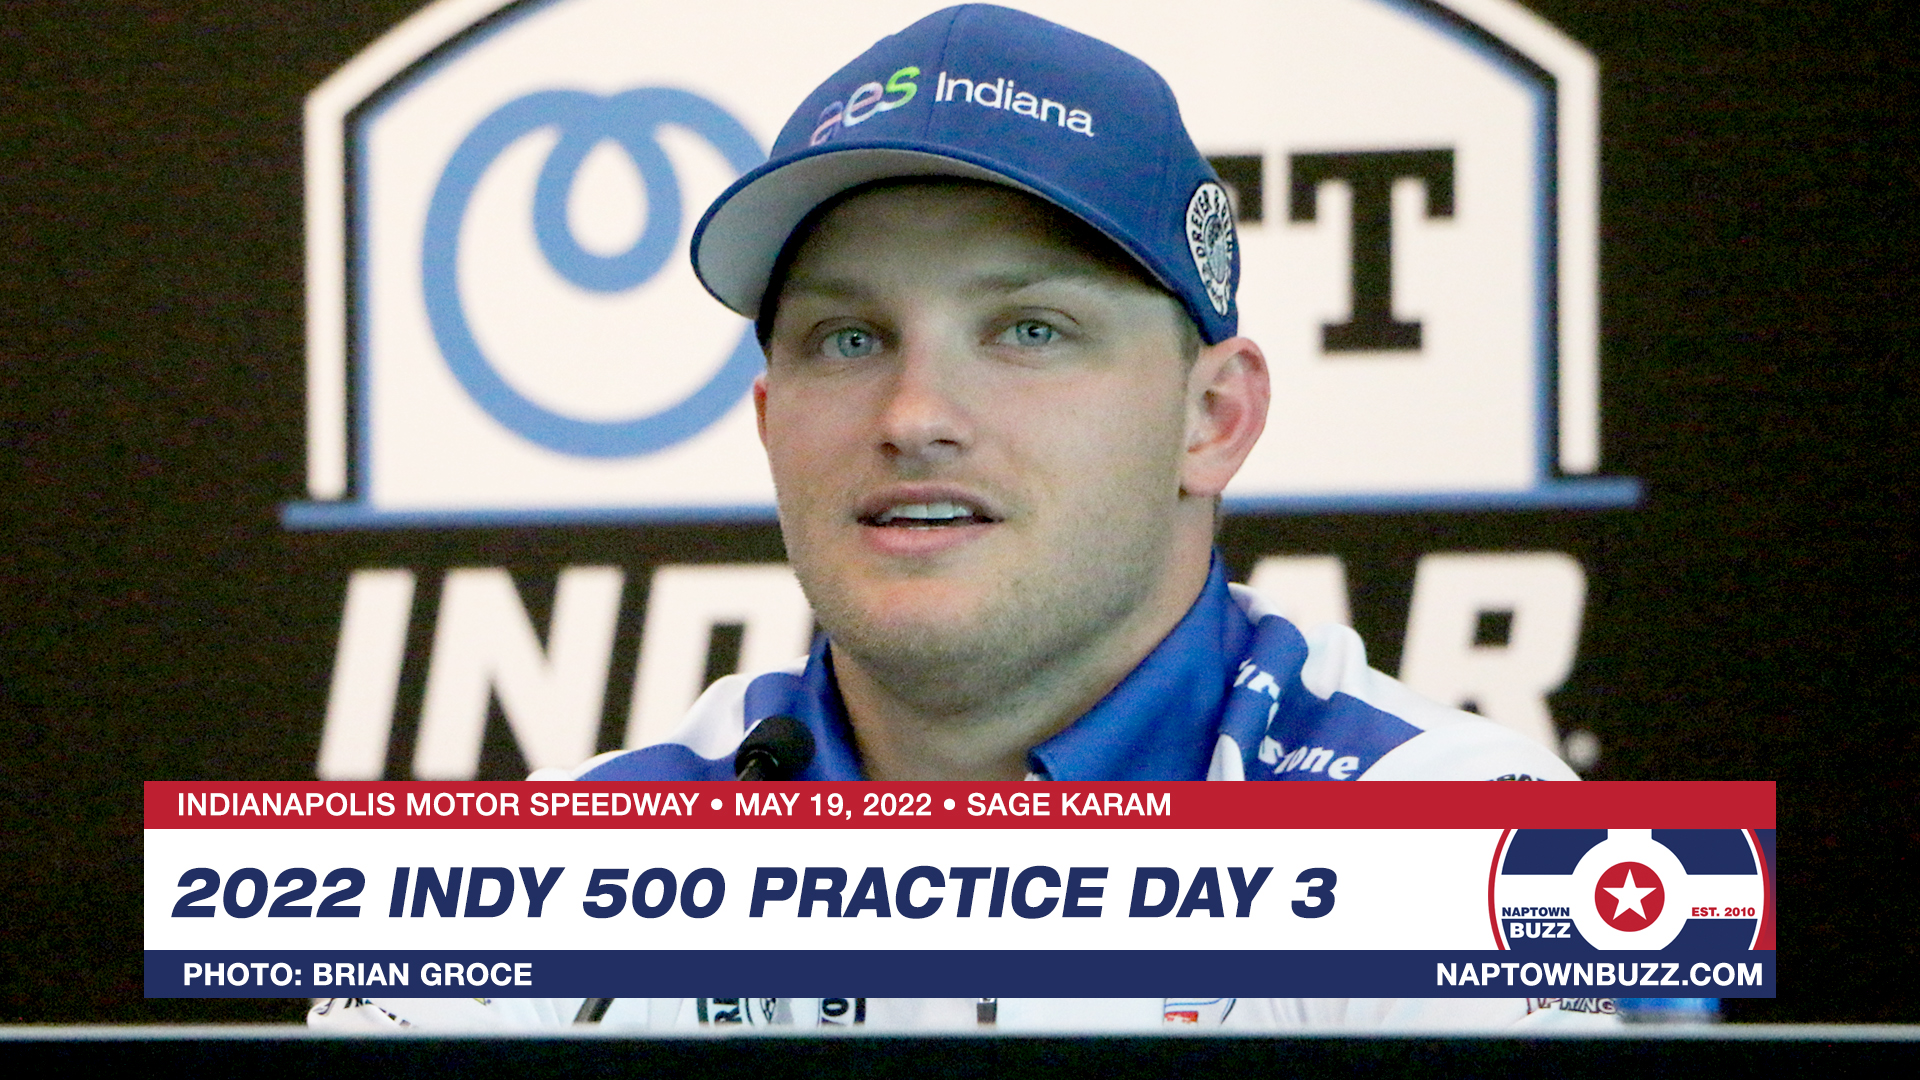 Sage Karam on Indy 500 Practice Day 3 at Indianapolis Motor Speedway on May 19, 2022